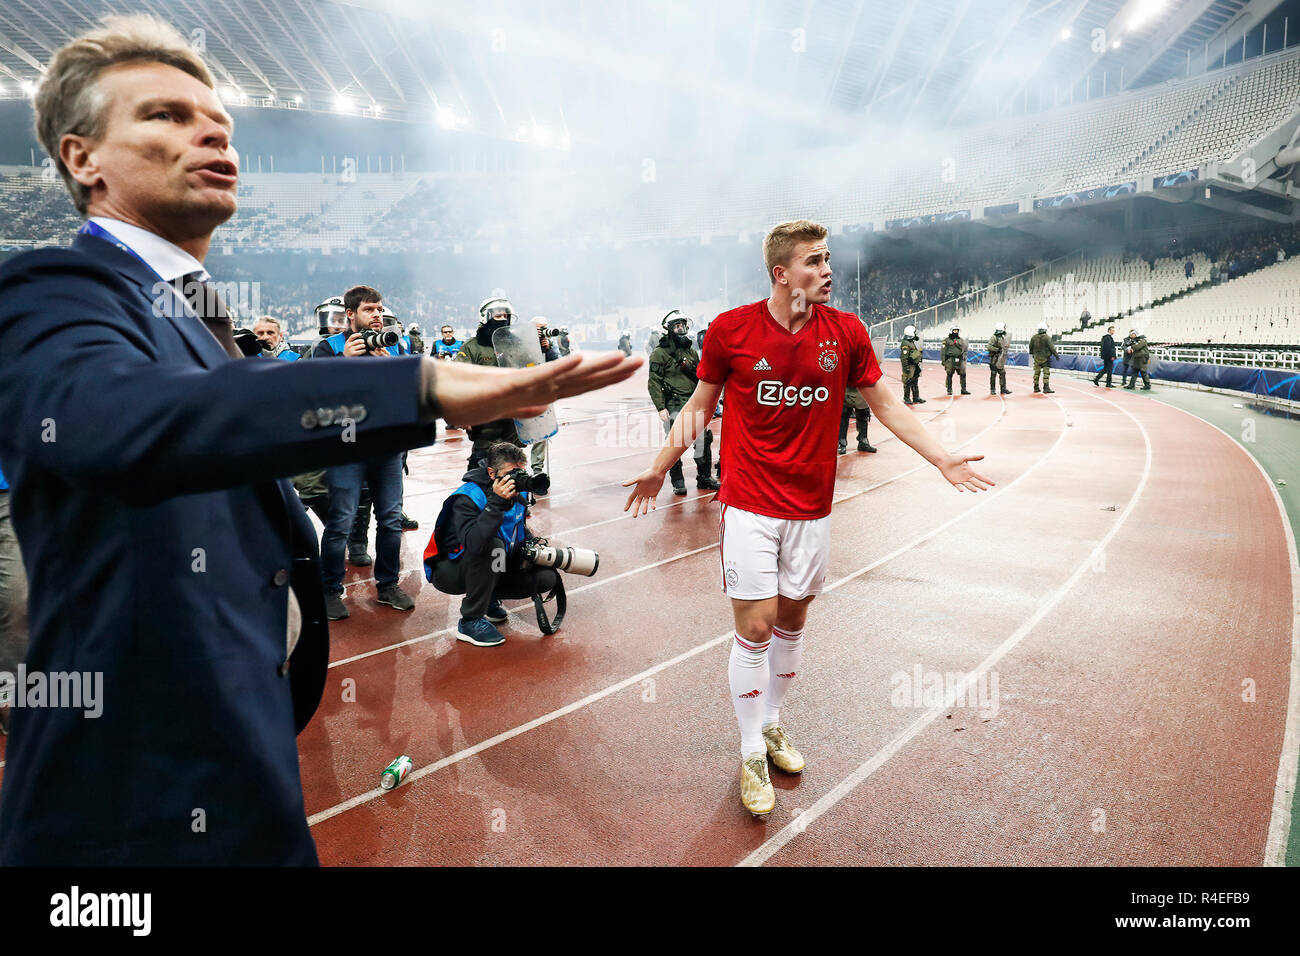 Athens, Greece. 27th November, 2018. ATHENS, Olympic Stadium, AEK Athens FC  - Ajax , football, Champions League, season 2018-2019, 27-11-2018, Ajax  player Matthijs de Ligt with supporters before the game AEK Athens -